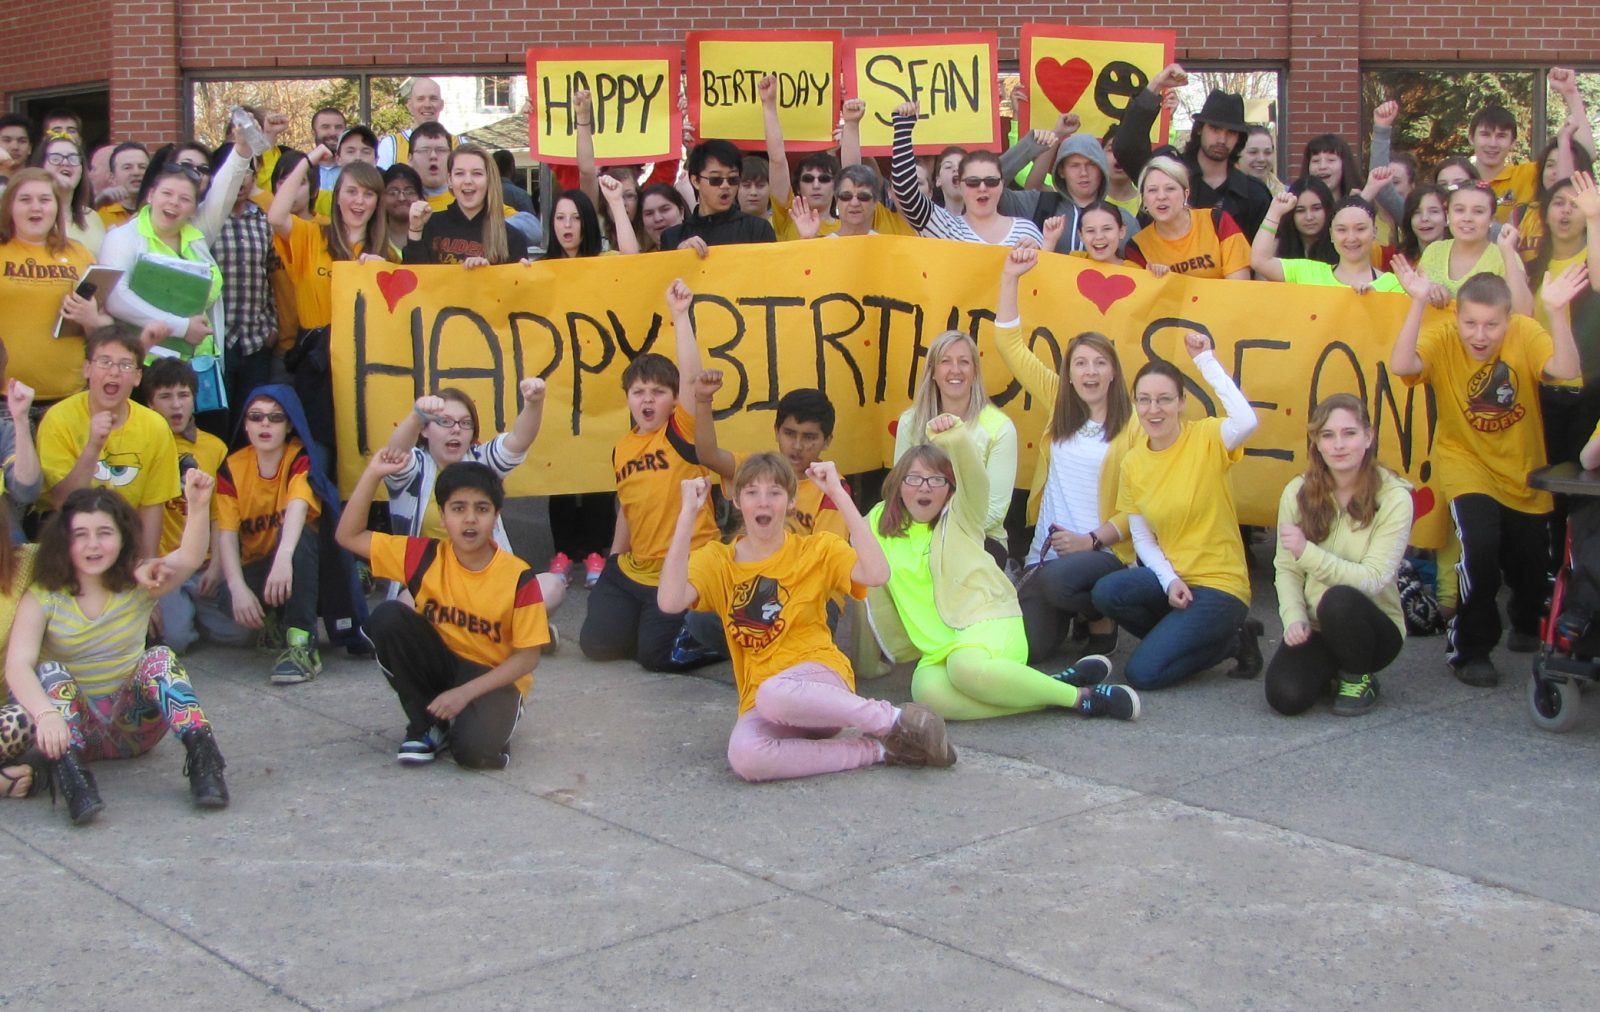 HAPPY BIRTHDAY SEAN!: Schools celebrate big day for young cancer battler